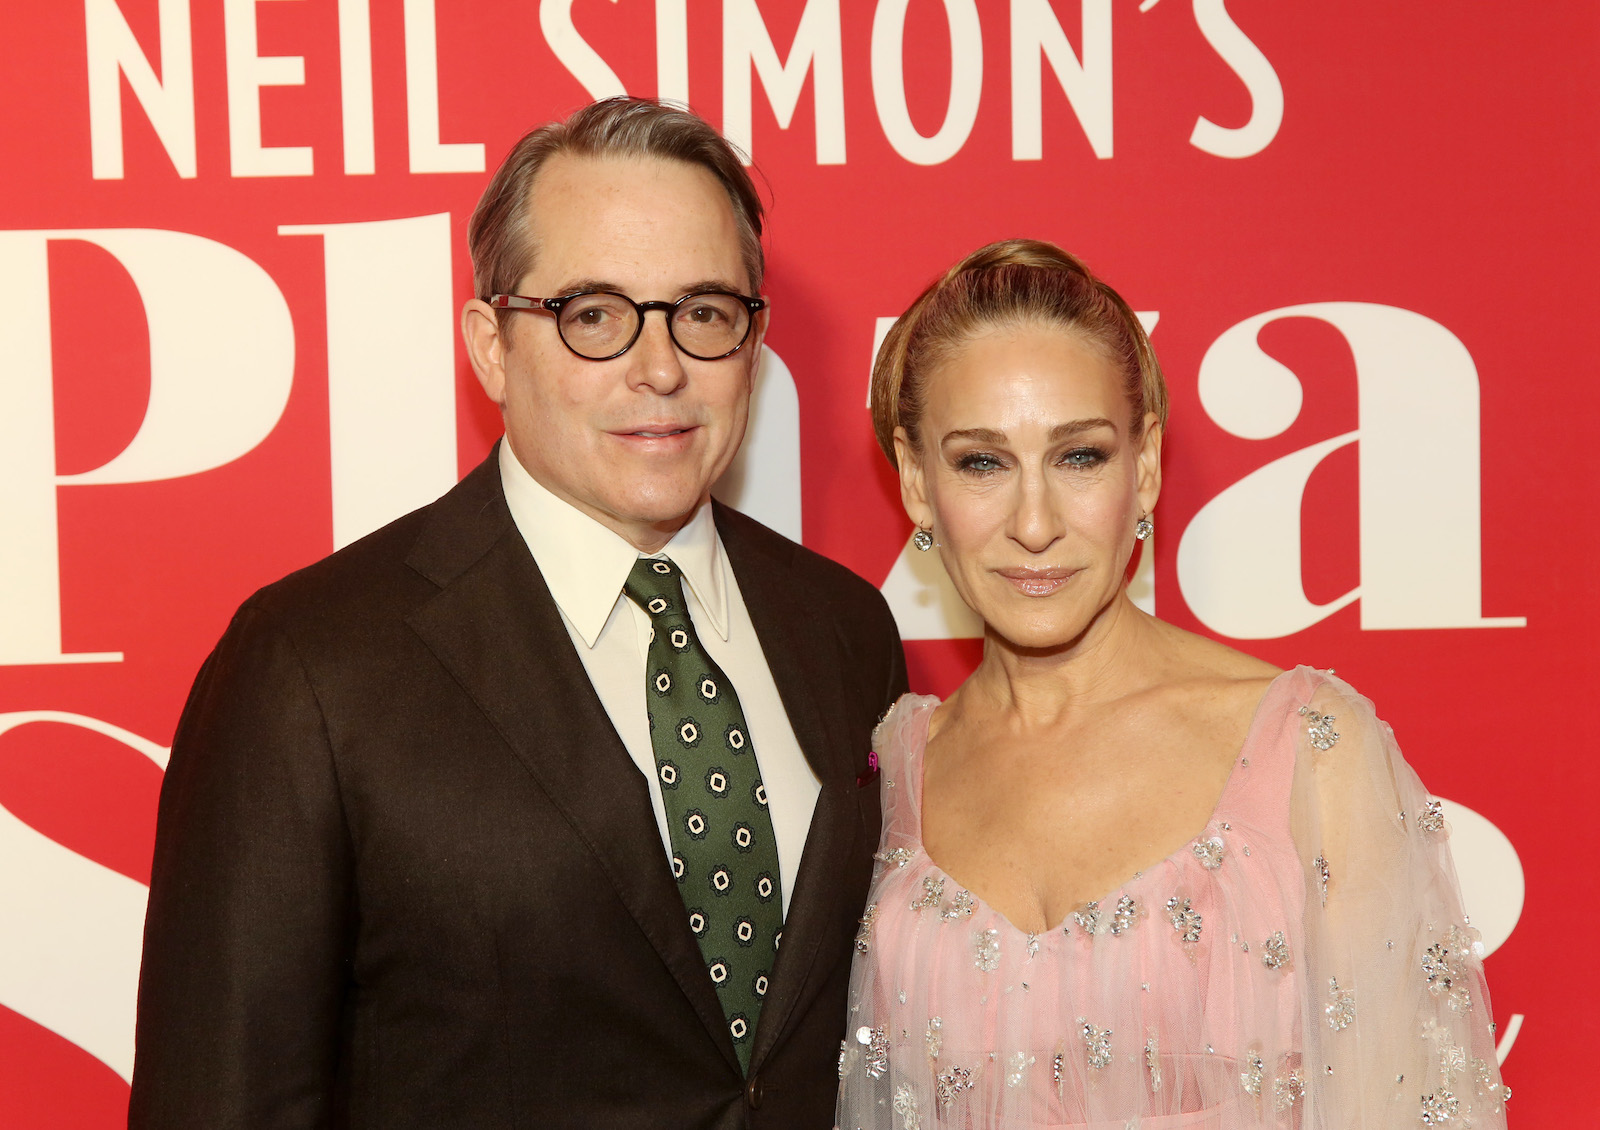 Matthew Broderick and Sarah Jessica Parker pose at the opening night of the Neil Simon play Plaza Suite